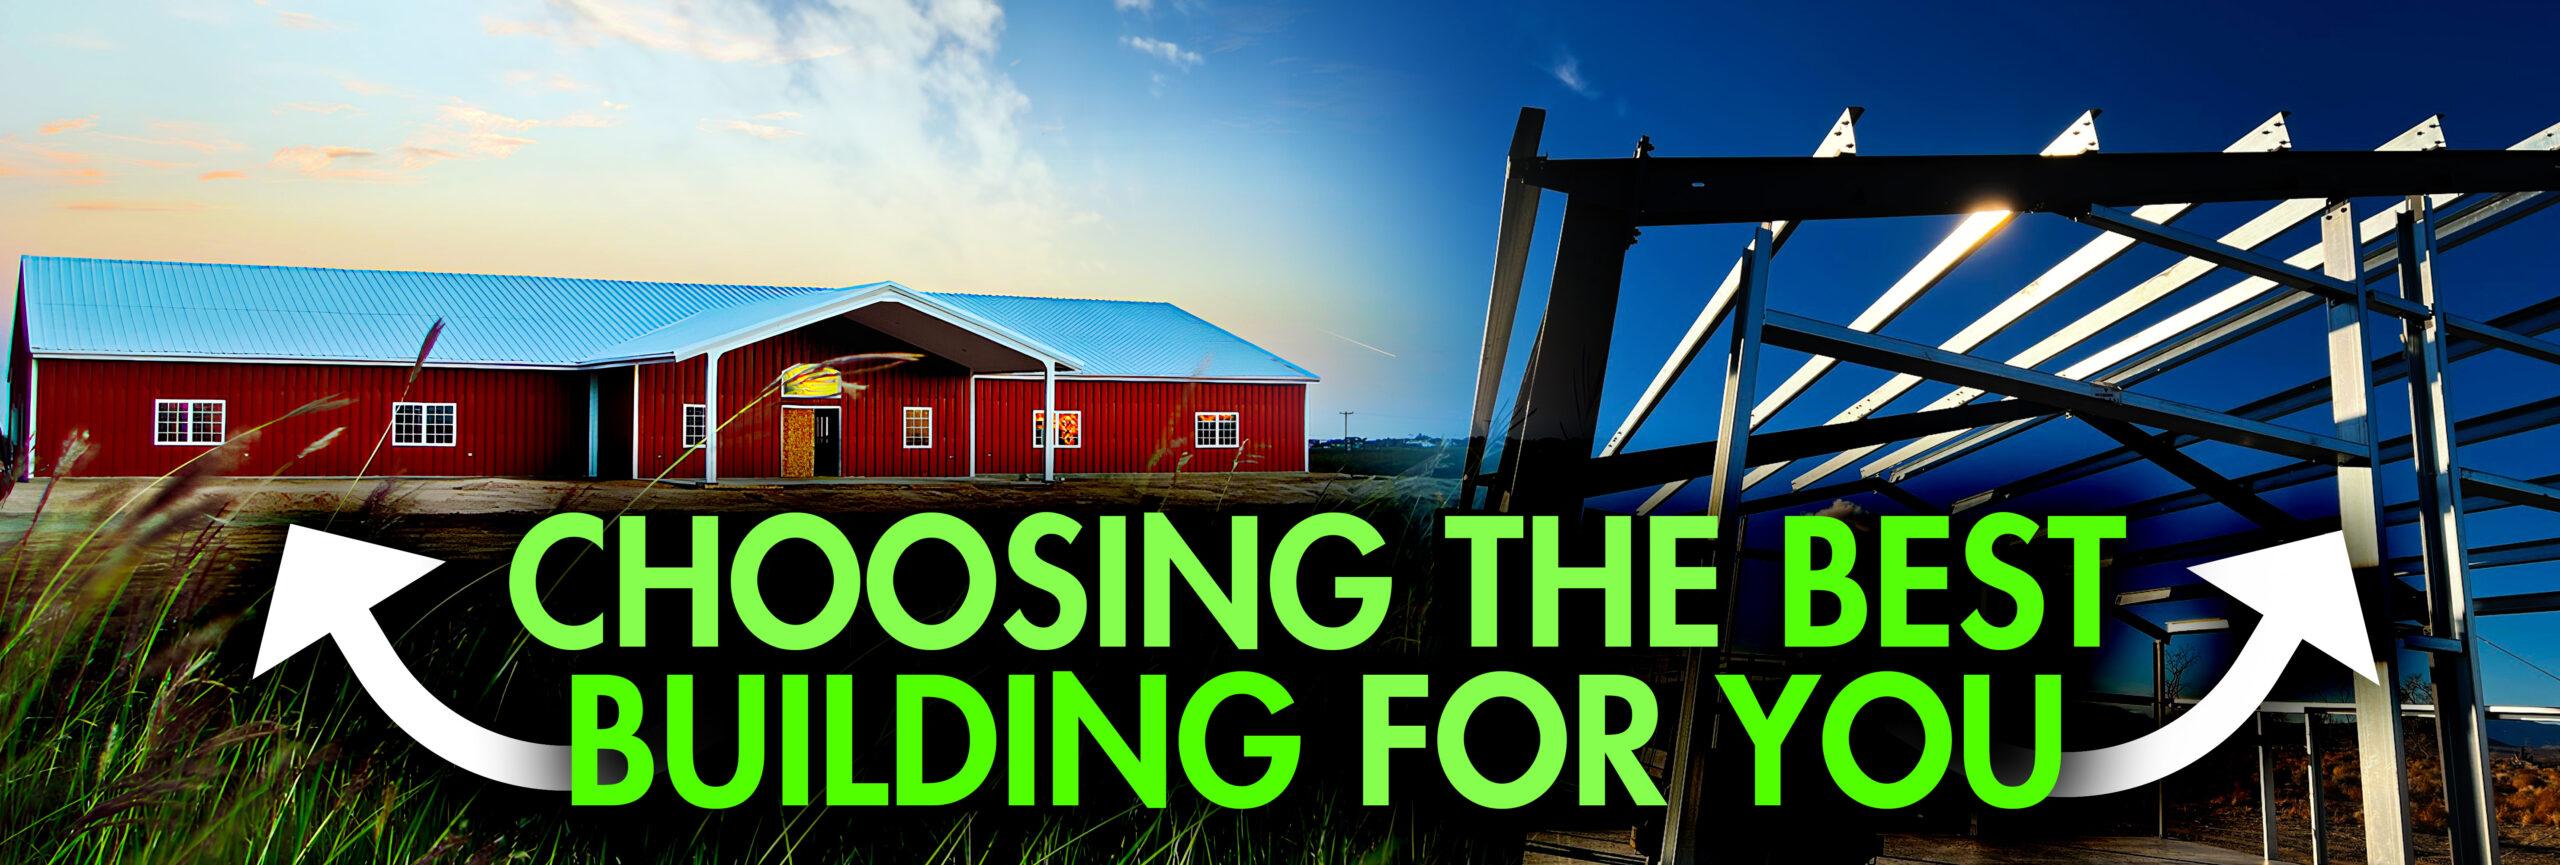 Pre-Engineered vs. Custom: Selecting the Perfect Metal Building for You